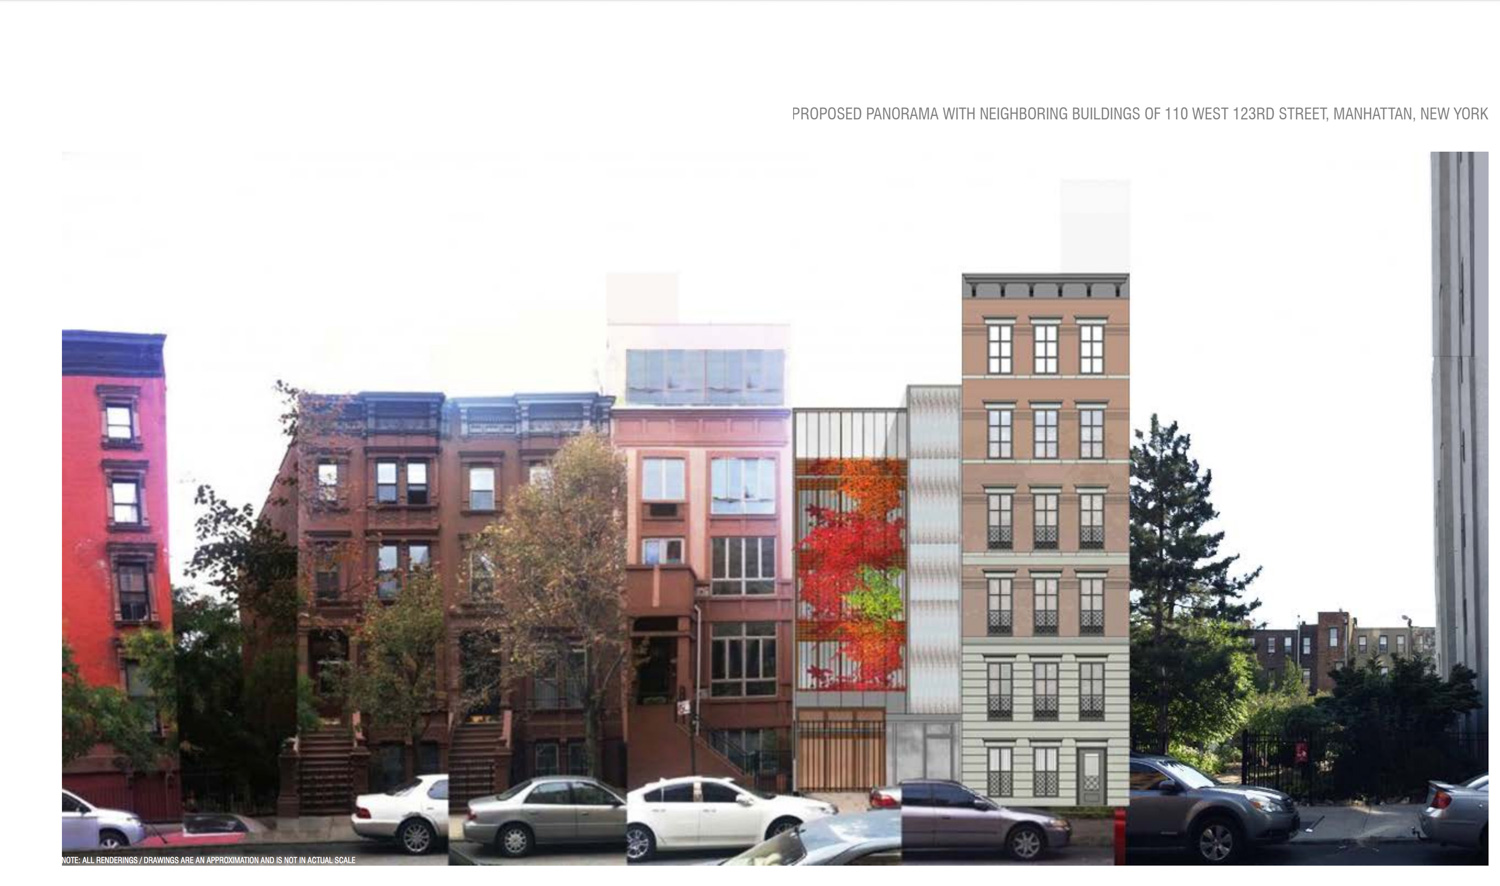 110 West 123rd Street in context, design by Shahrish Consulting